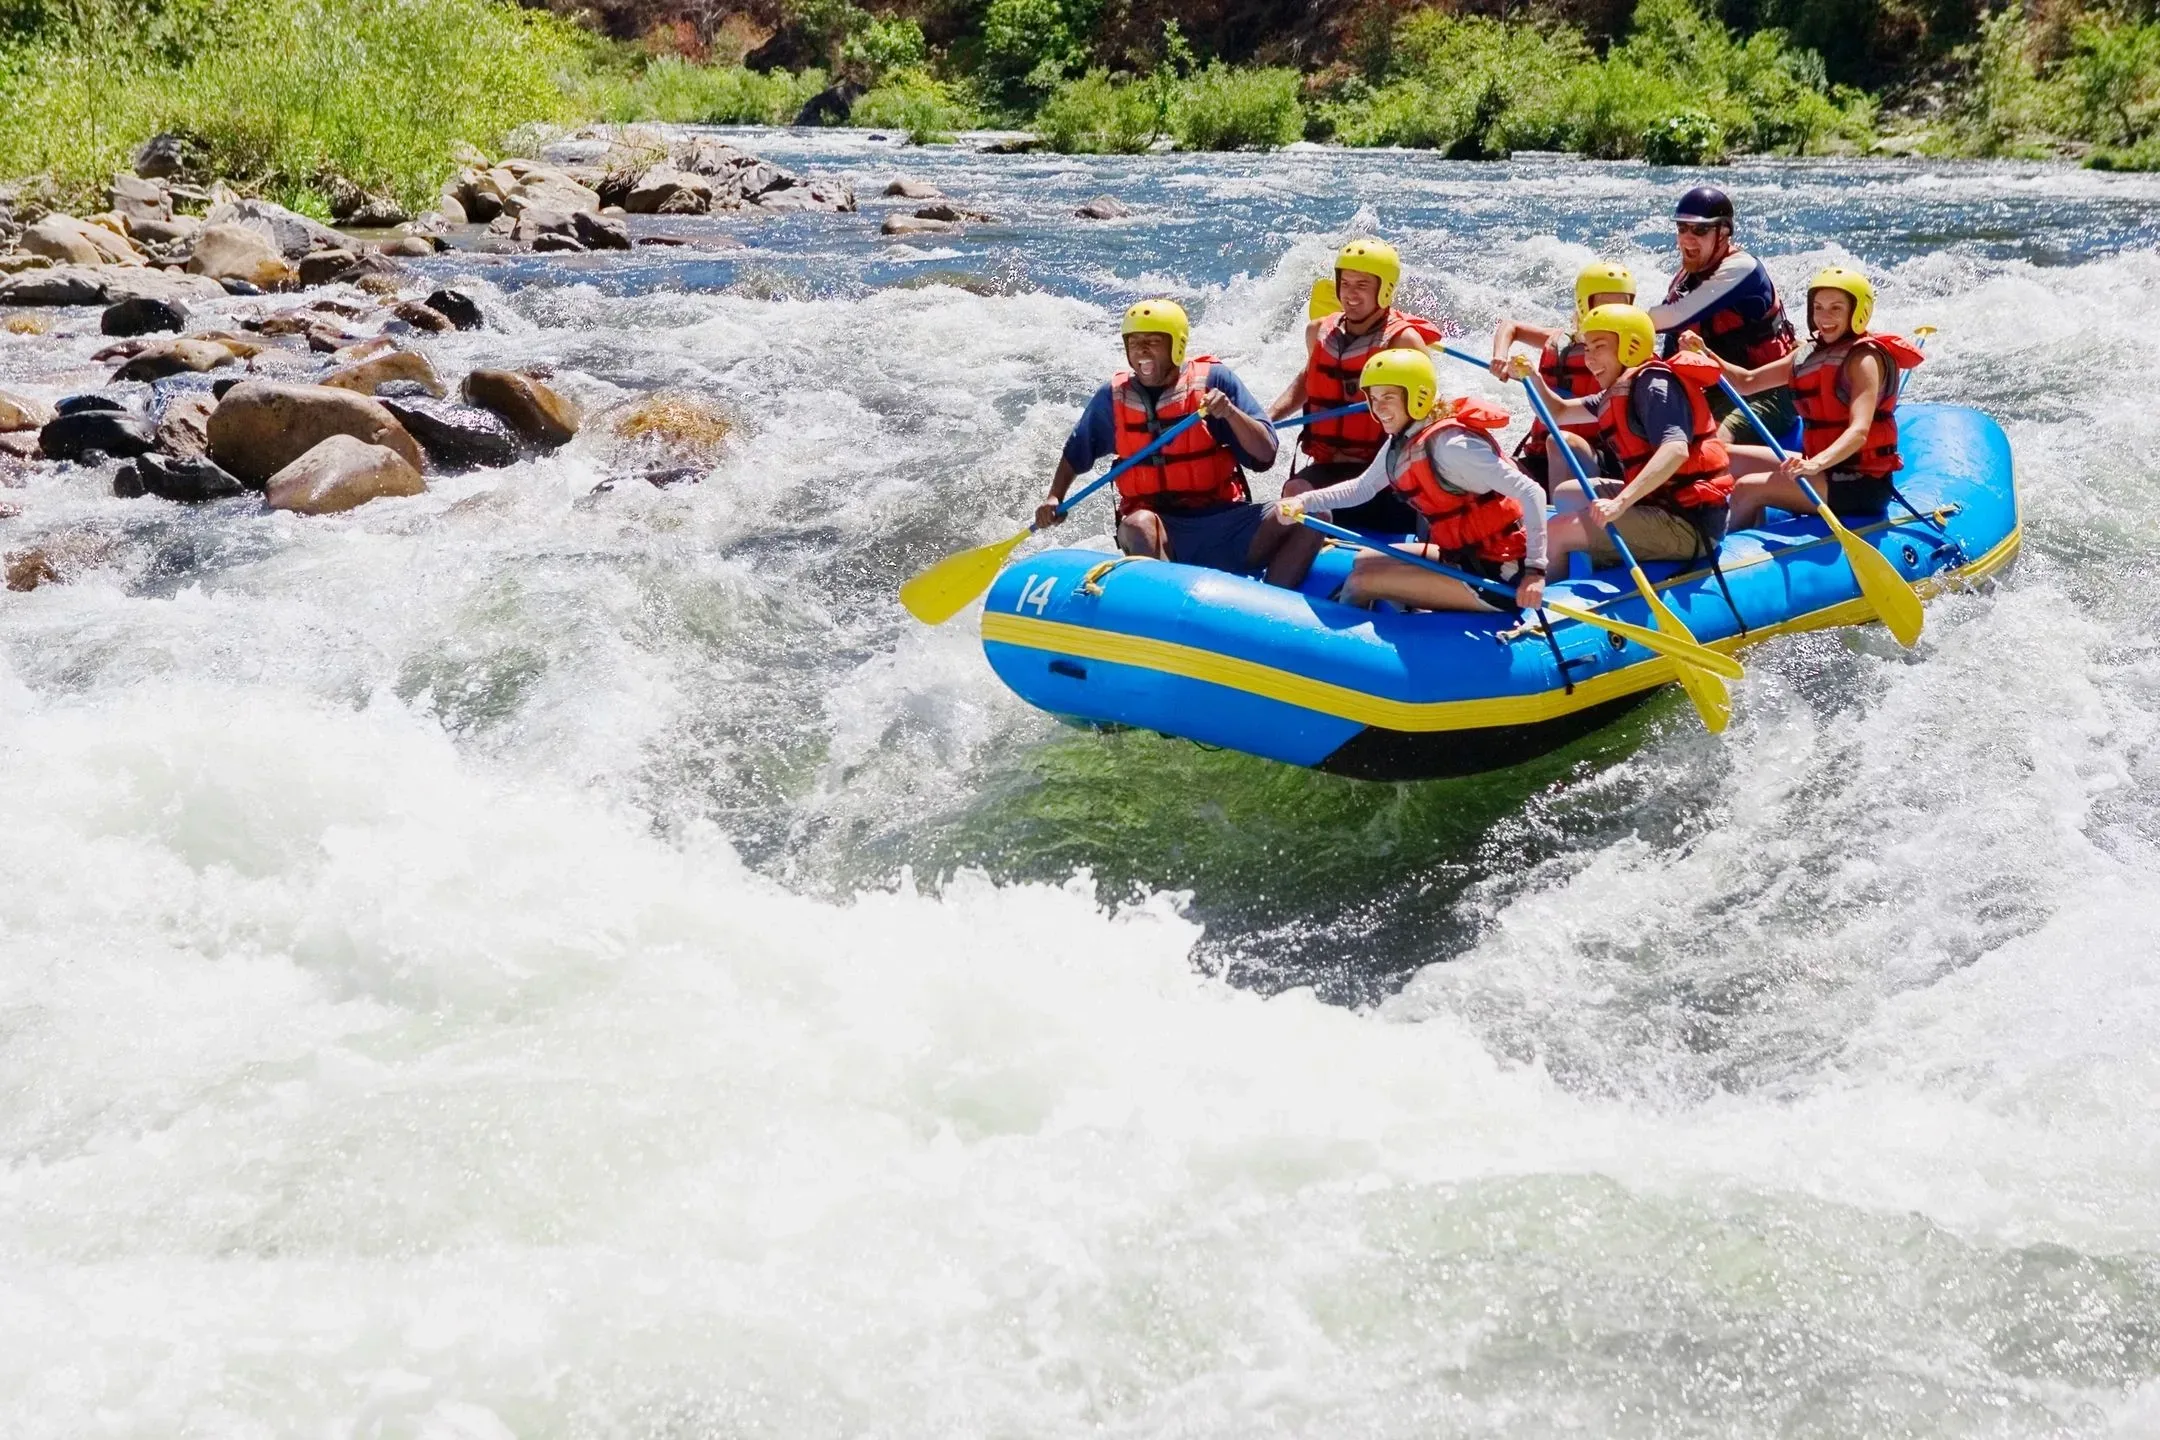 Whitewater rafting experience on the Exploits River